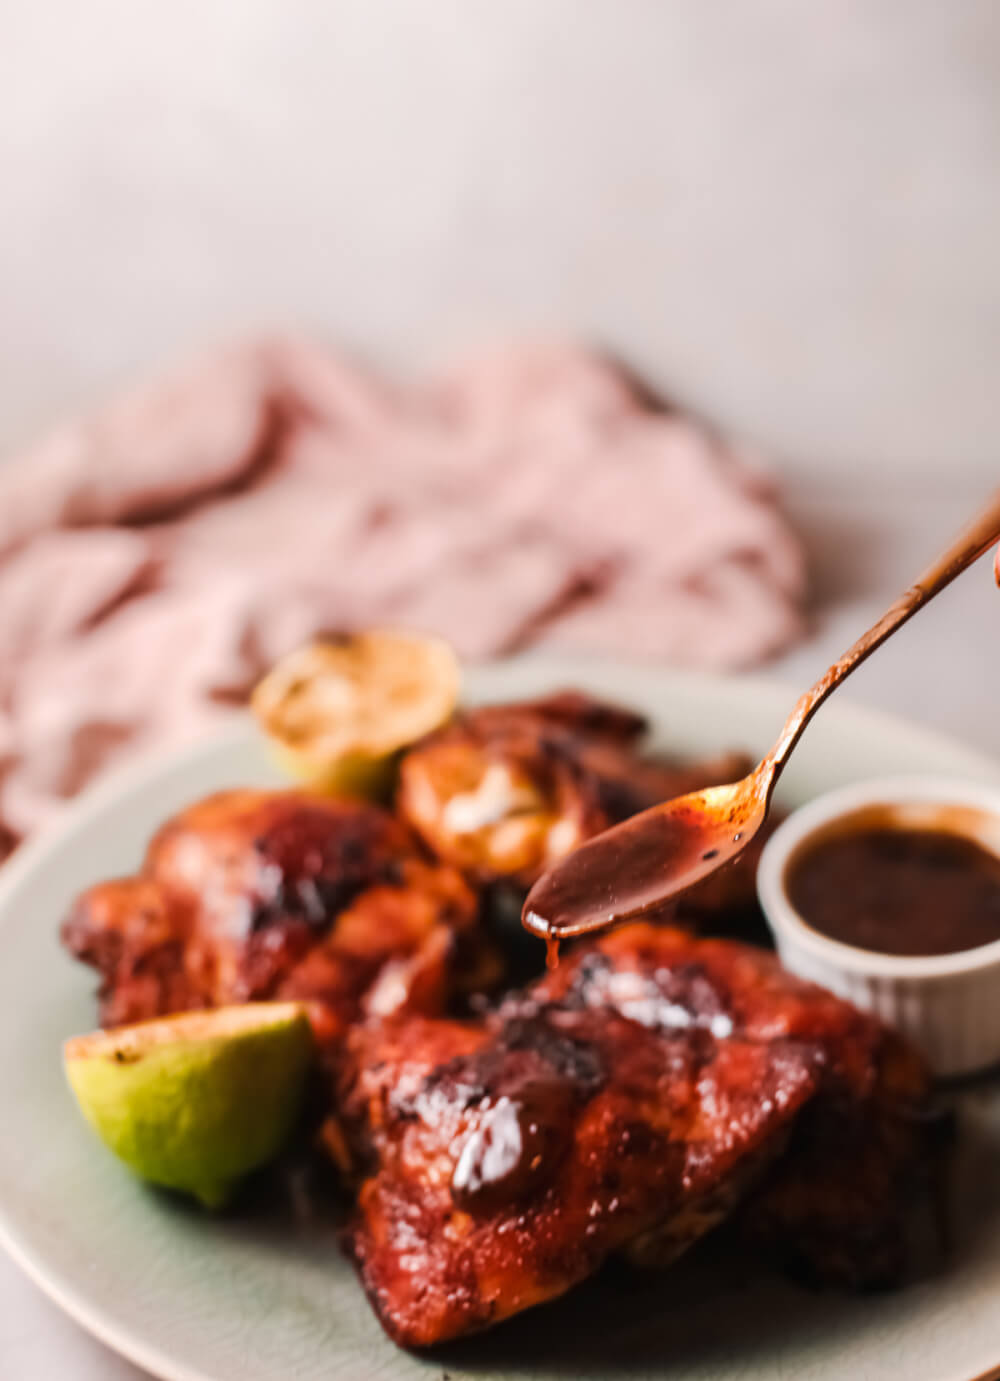 Baked Huli Huli Chicken Recipe featured by top Hawaii blog, Hawaii Travel with Kids.